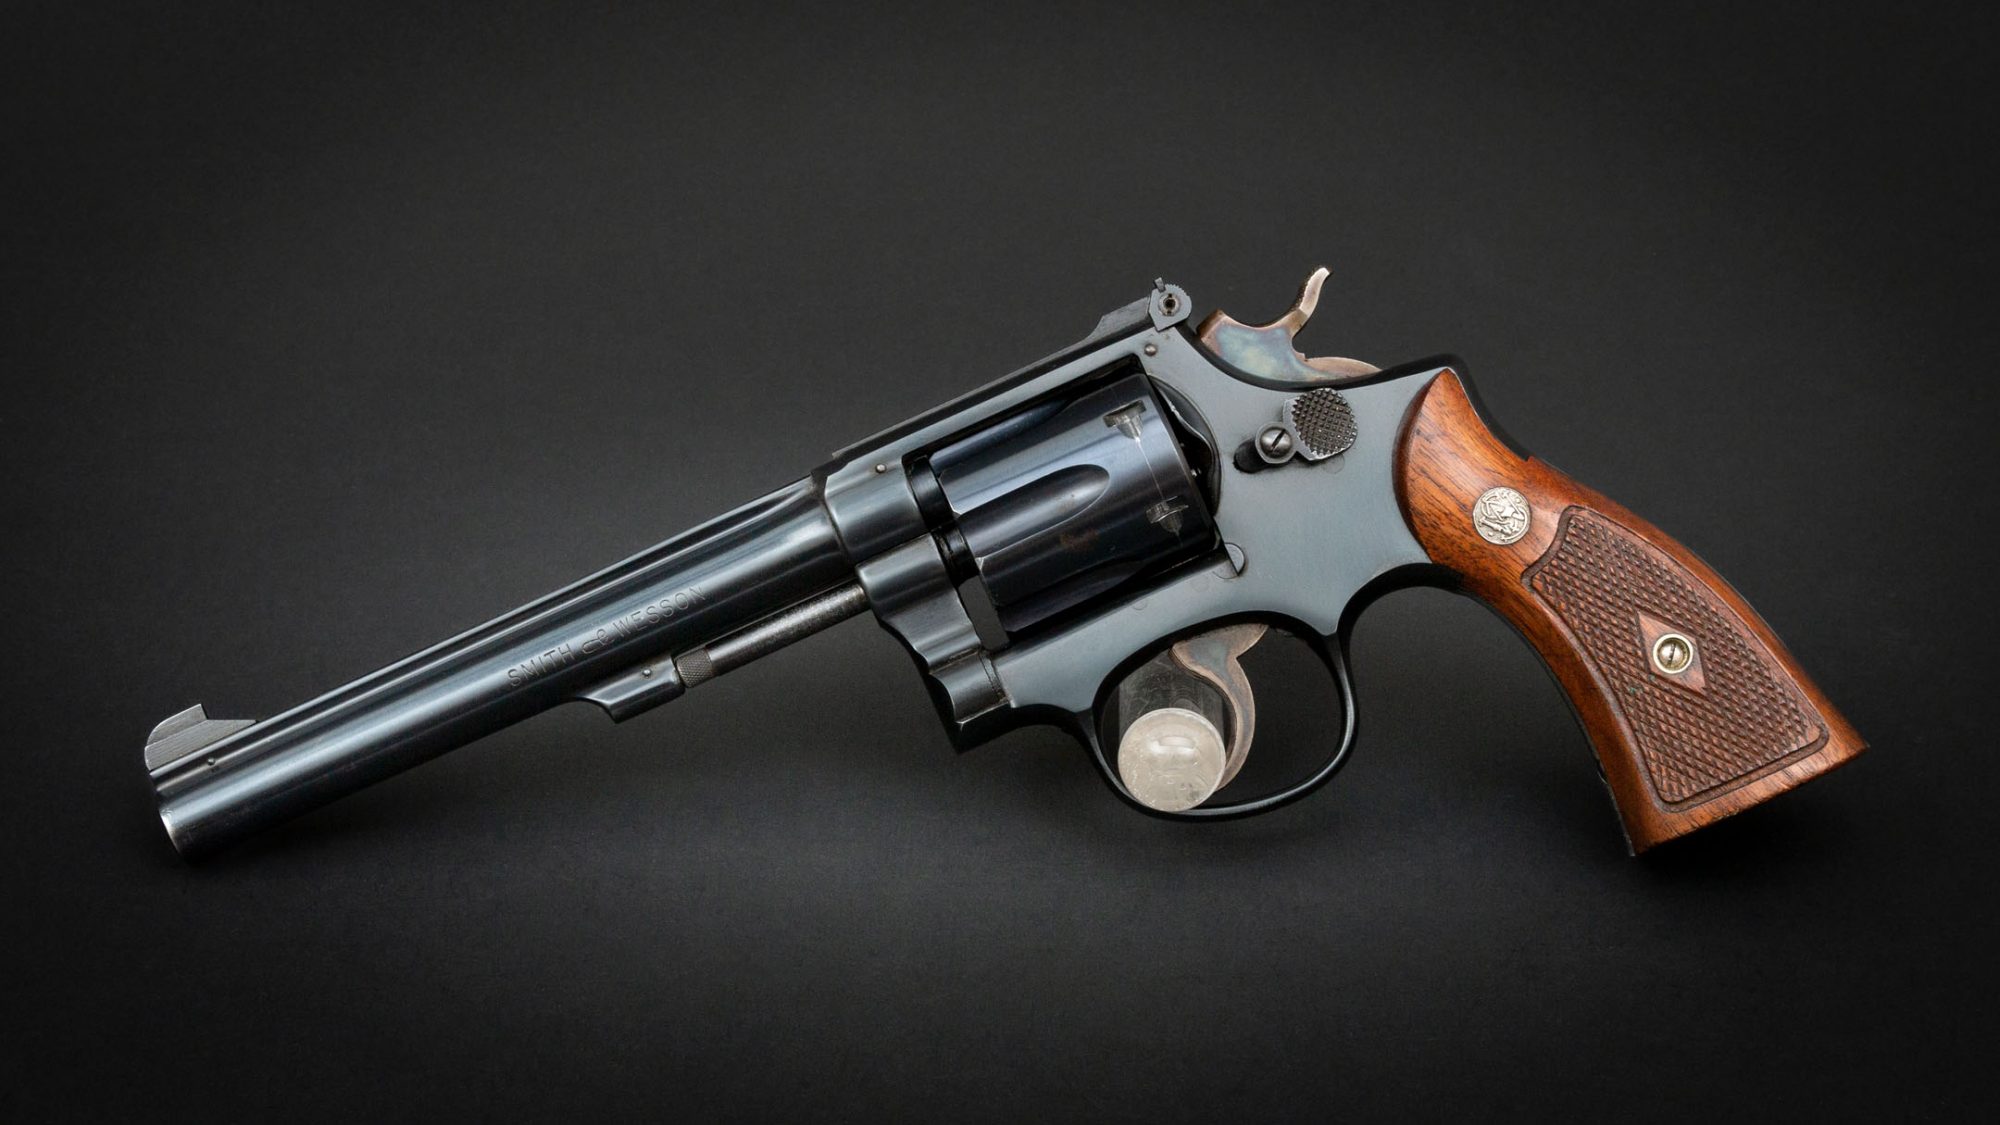 Smith & Wesson Model K22 Masterpiece, for sale by Turnbull Restoration Co. of Bloomfield, NY